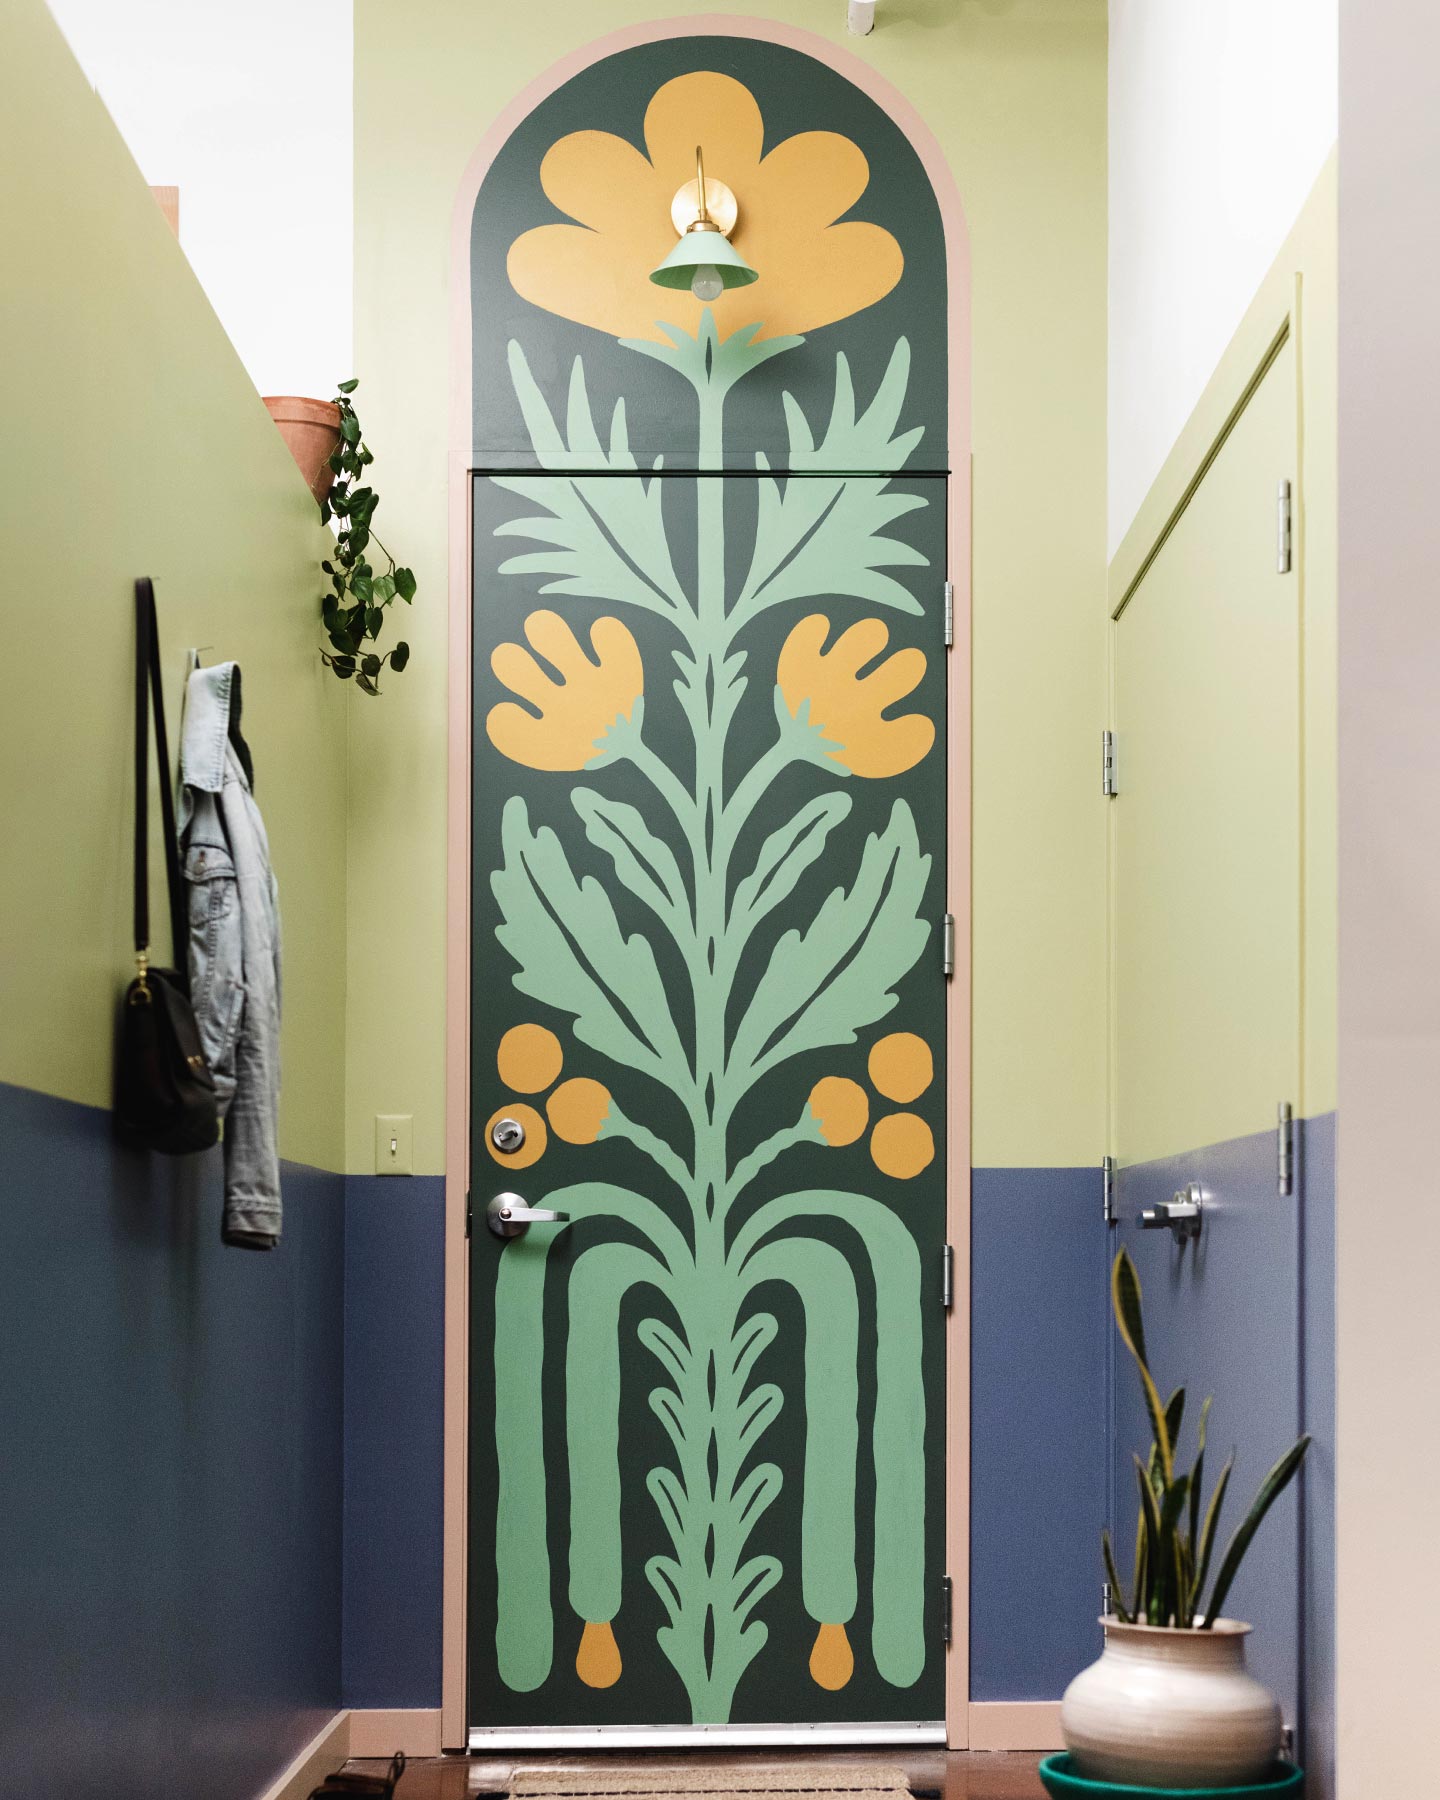 After adding a mural on the wall, Lauren's studio better matched her creative, vibrant energy.